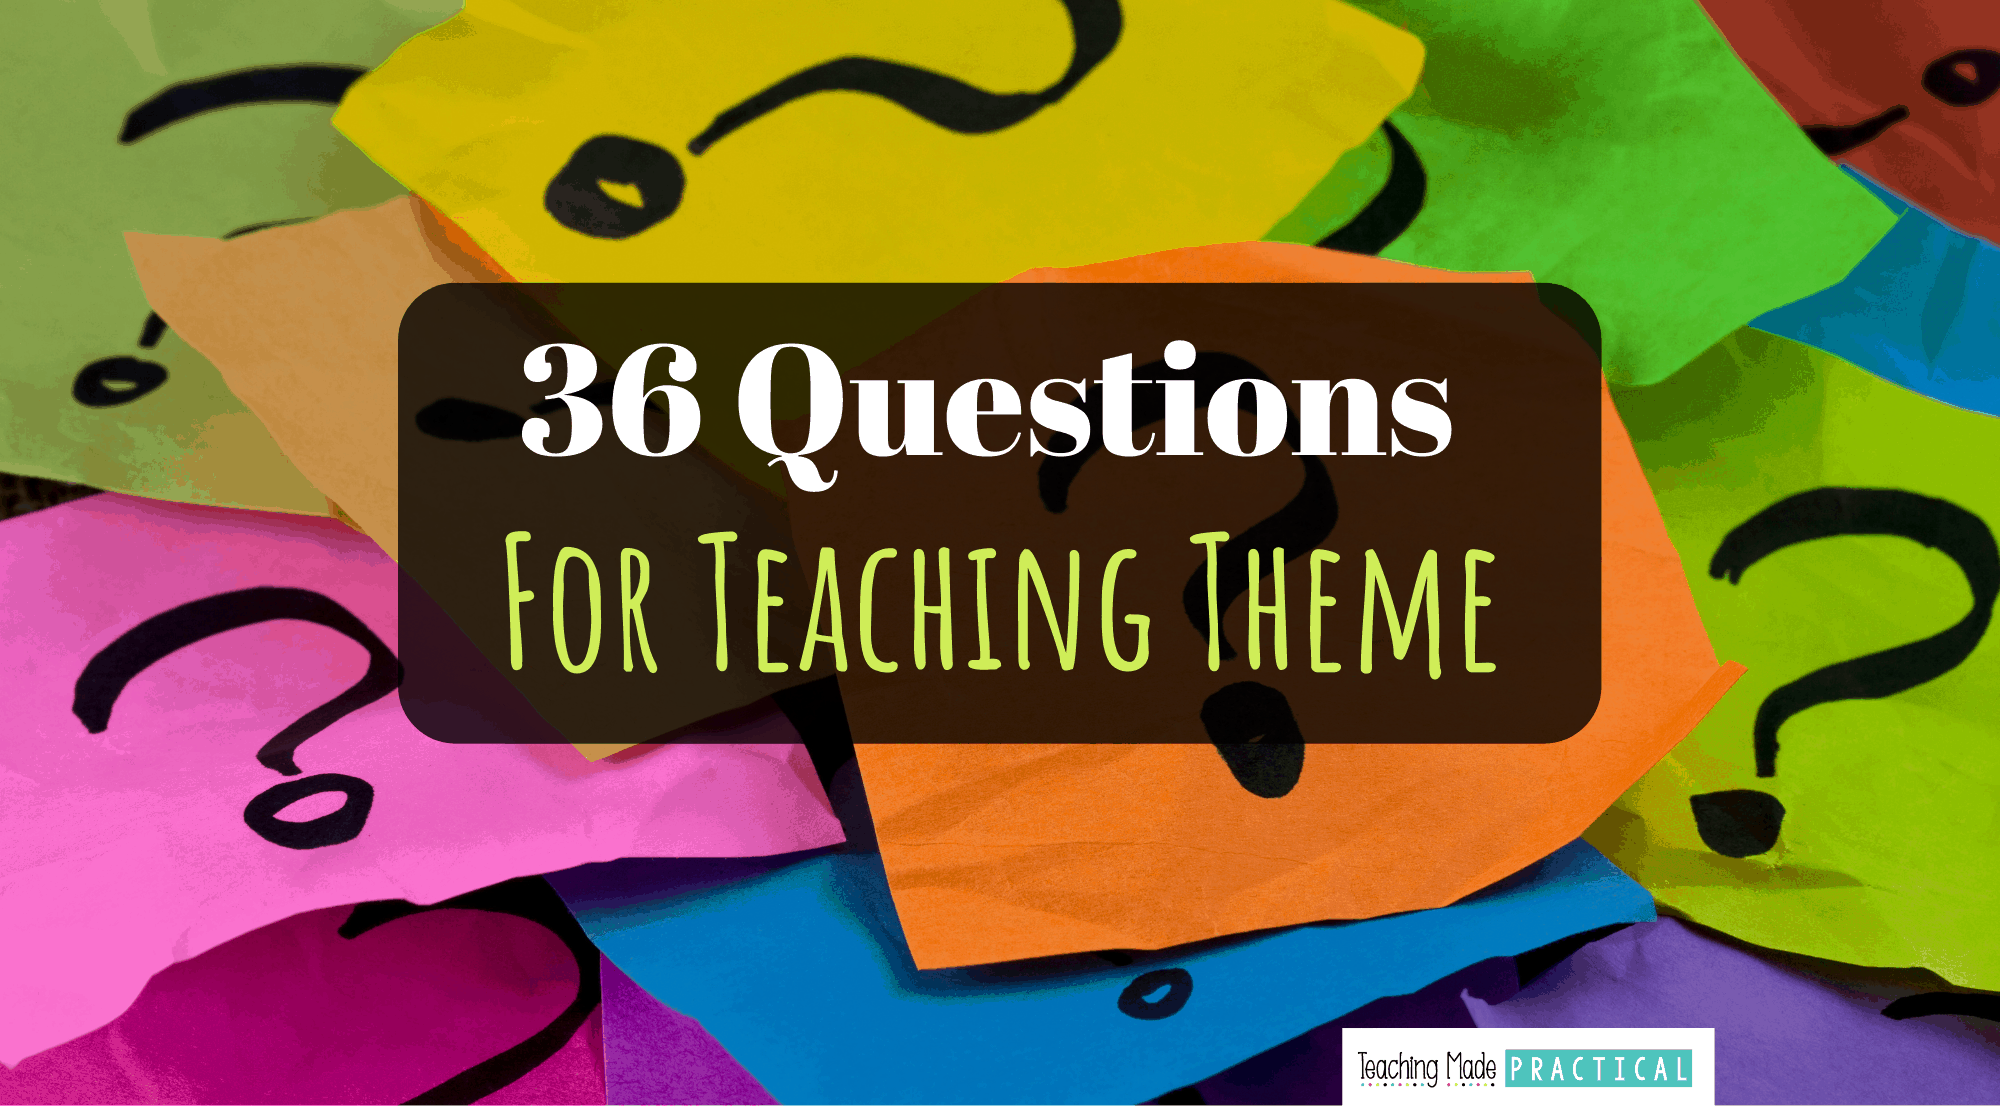 Higher order thinking questions to help you teach theme to your third, fourth, and fifth grade students